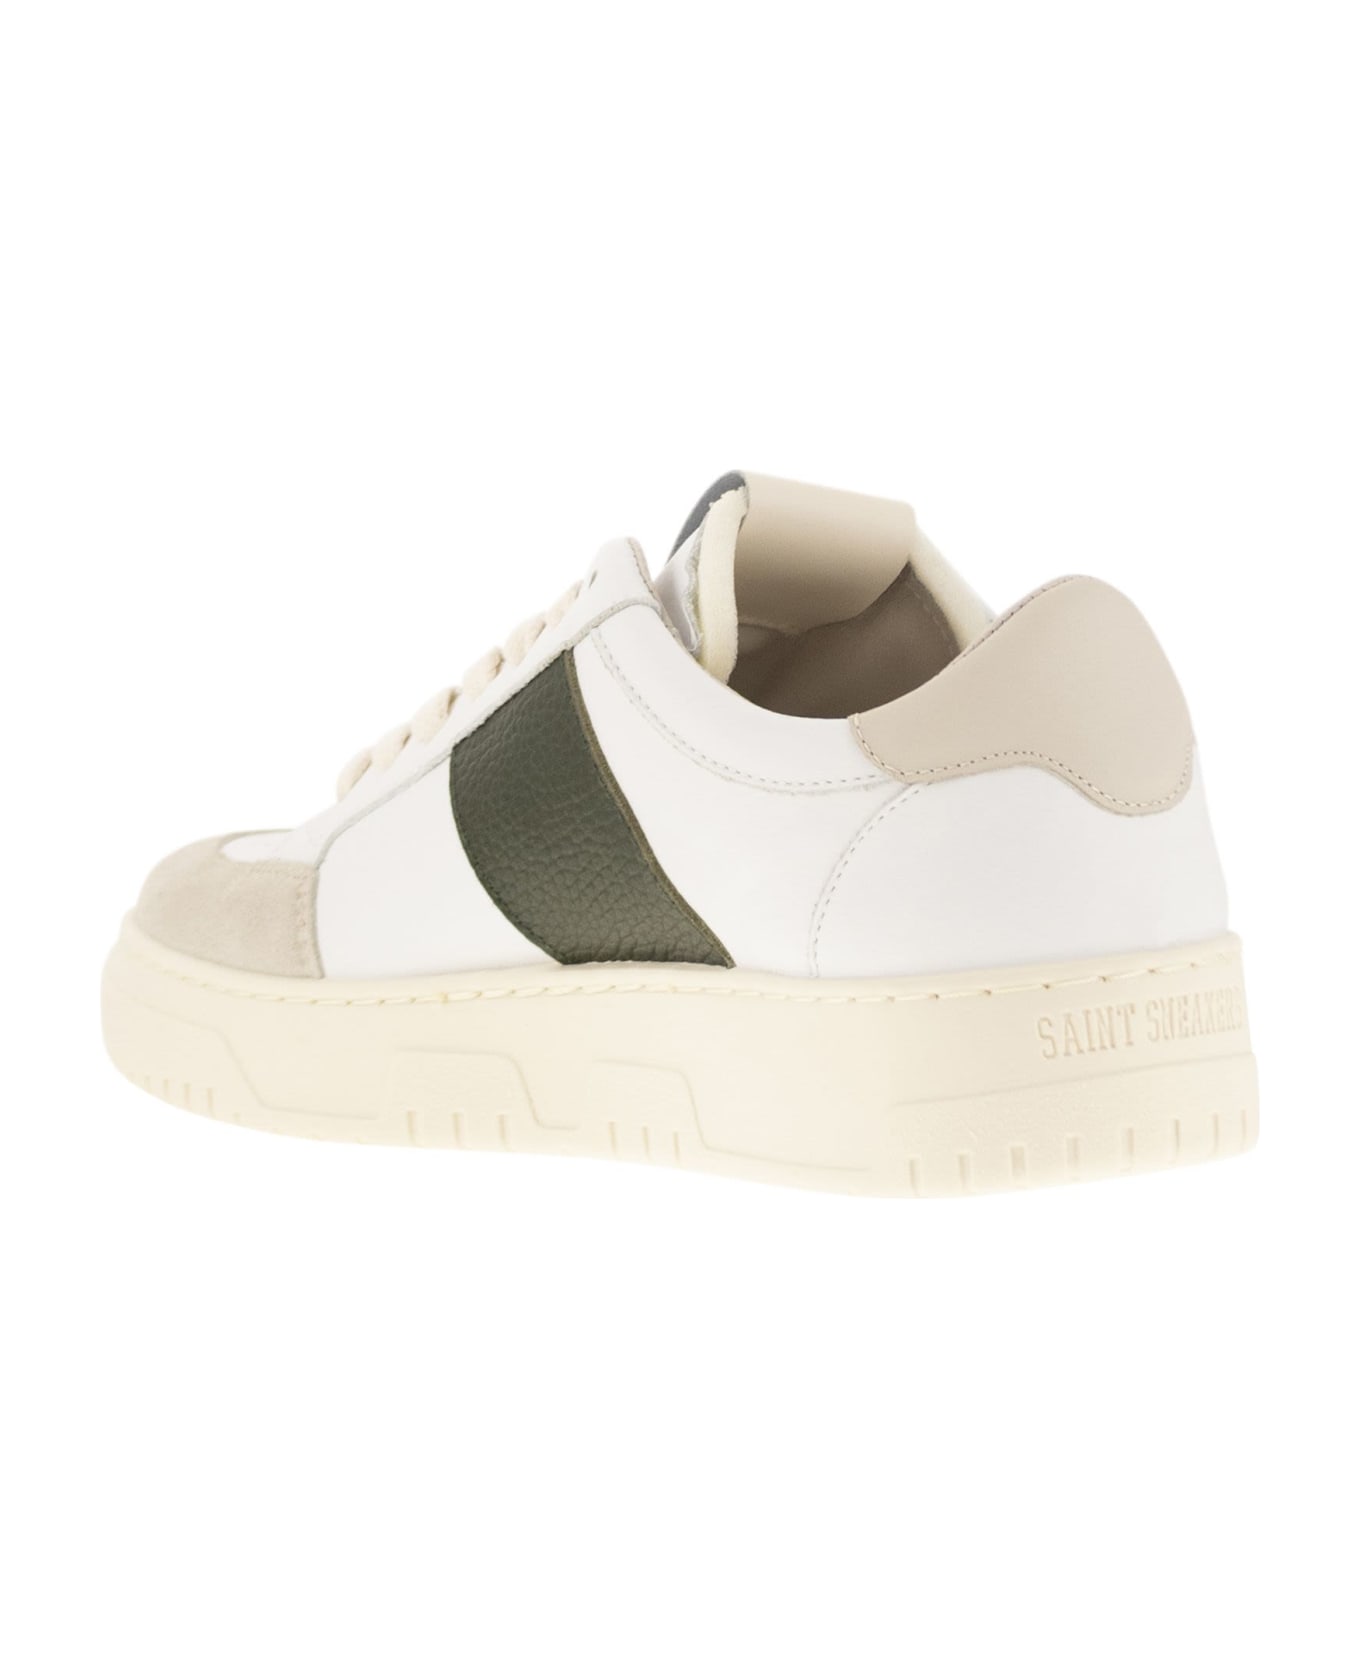 Saint Sneakers Sail - Leather And Suede Trainers - White/green